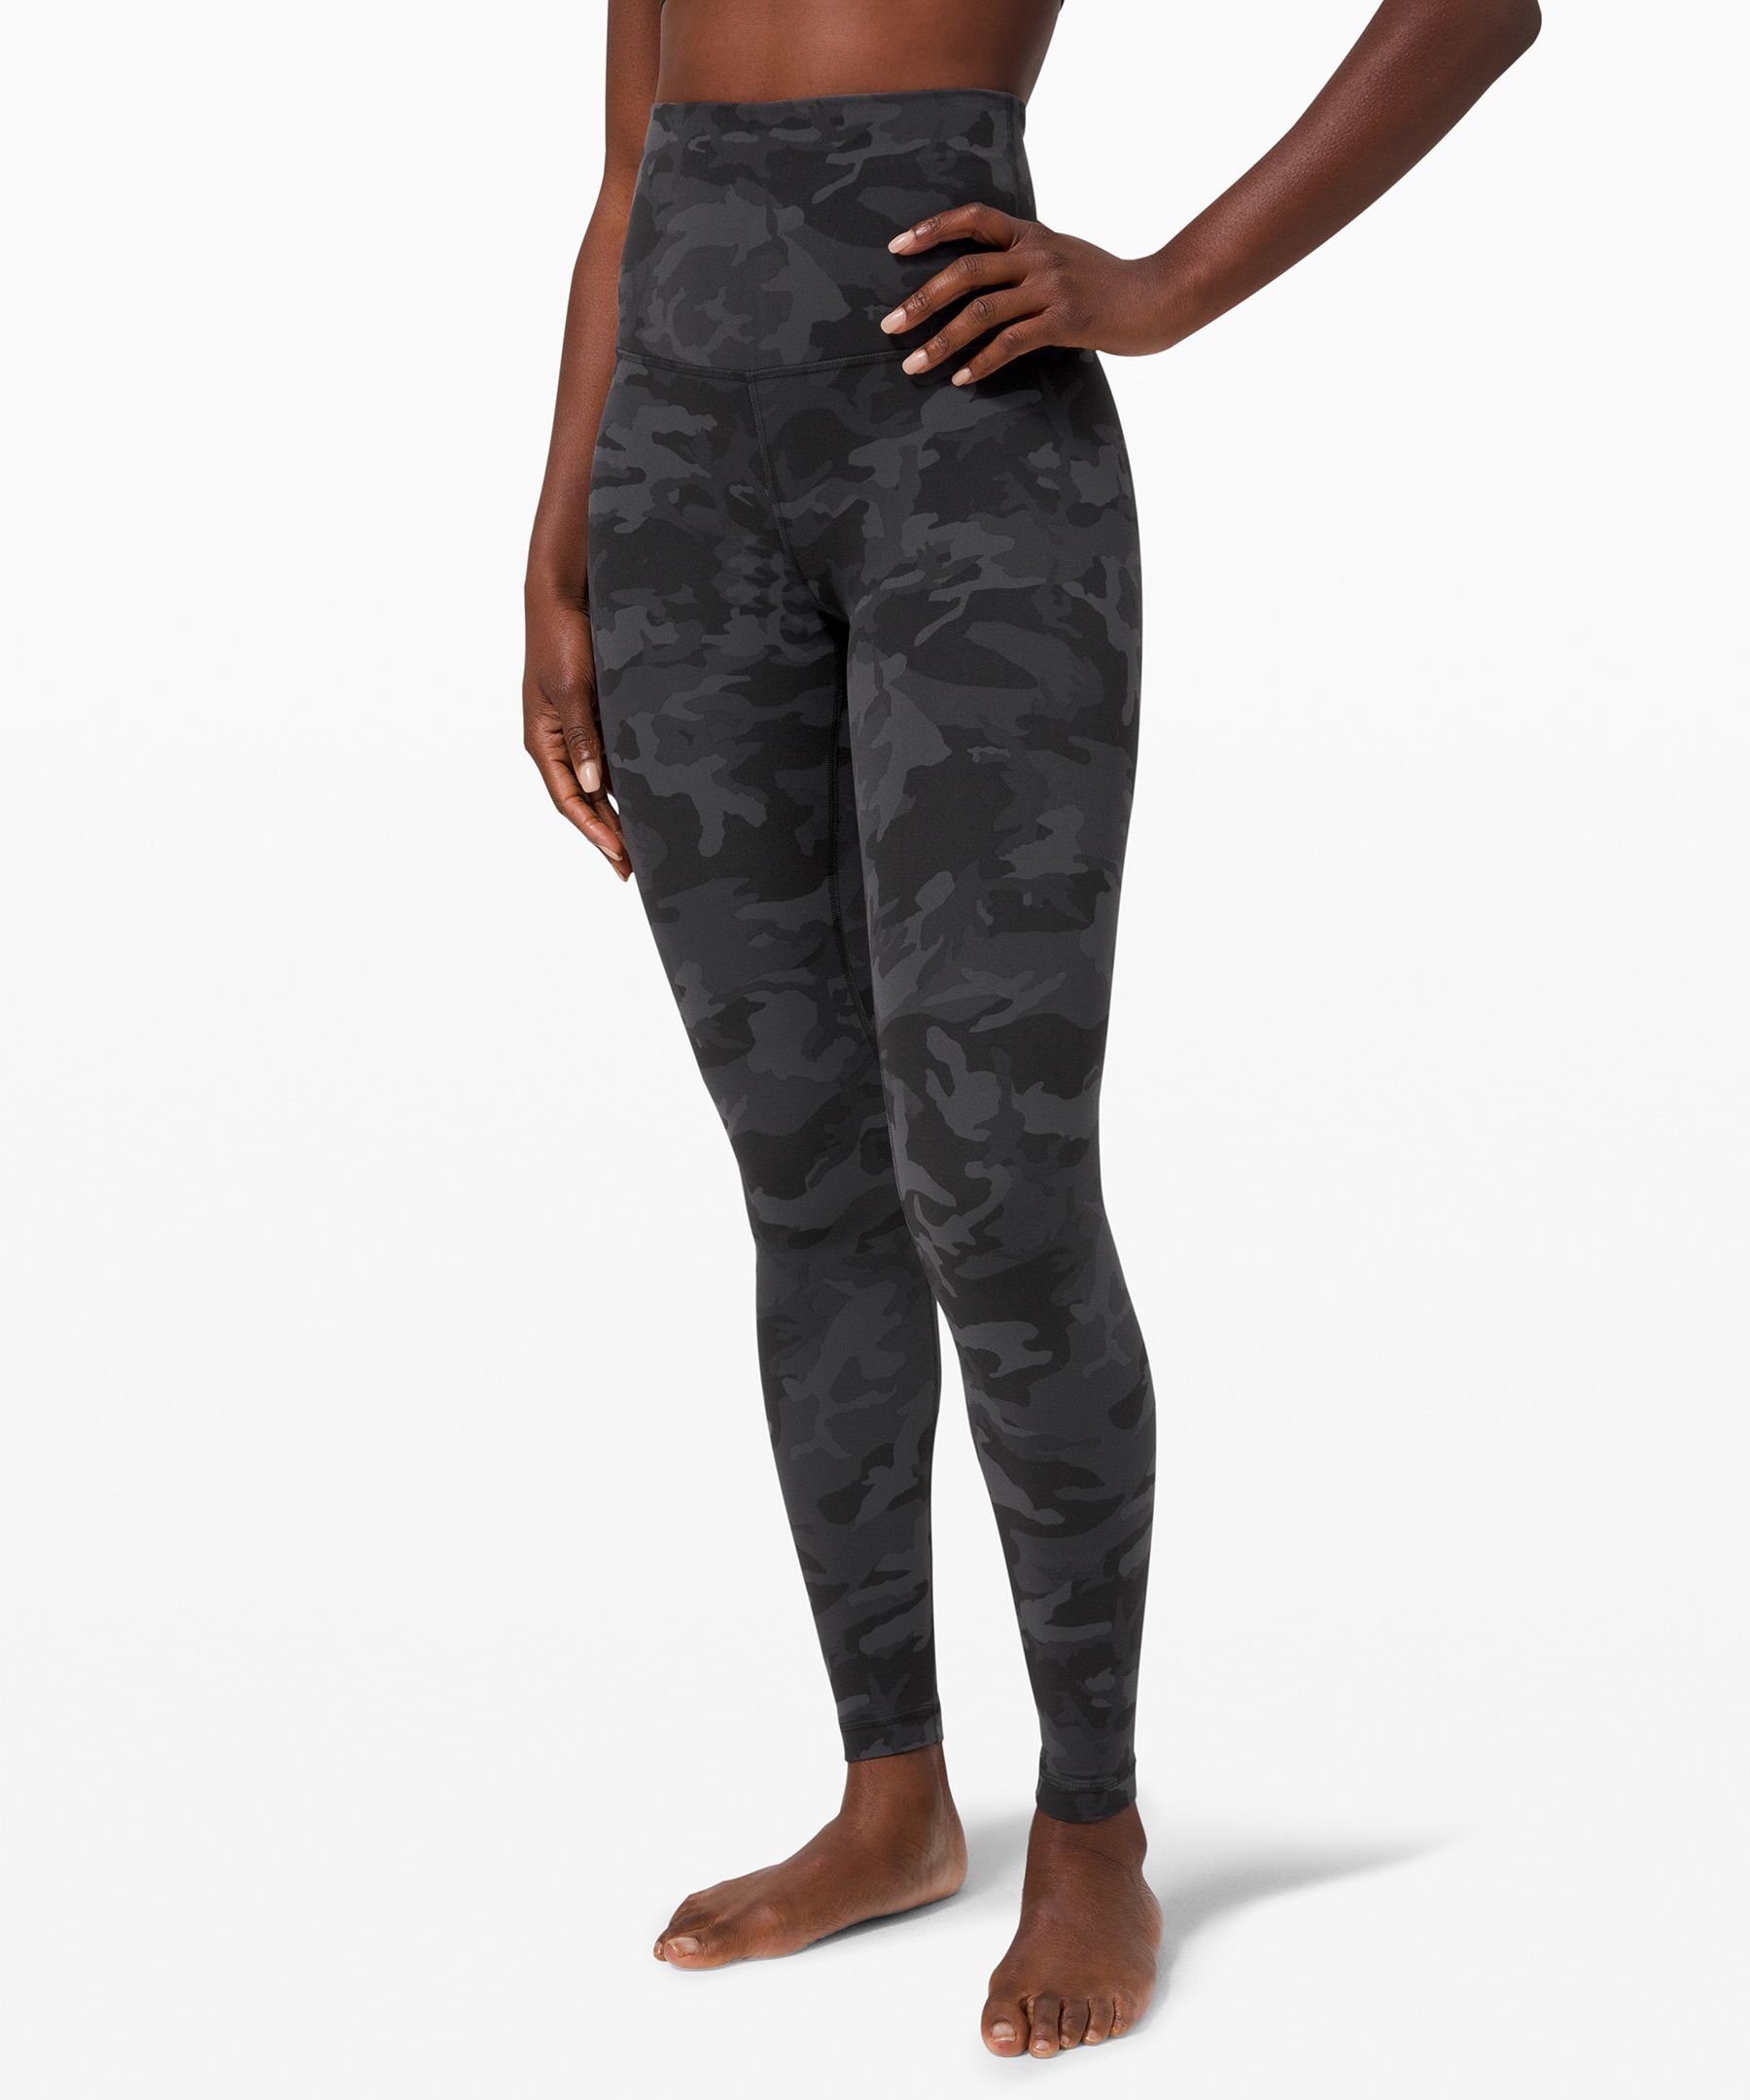 Lululemon Align™ Pant Super High-rise 28" In Incognito Camo Grey